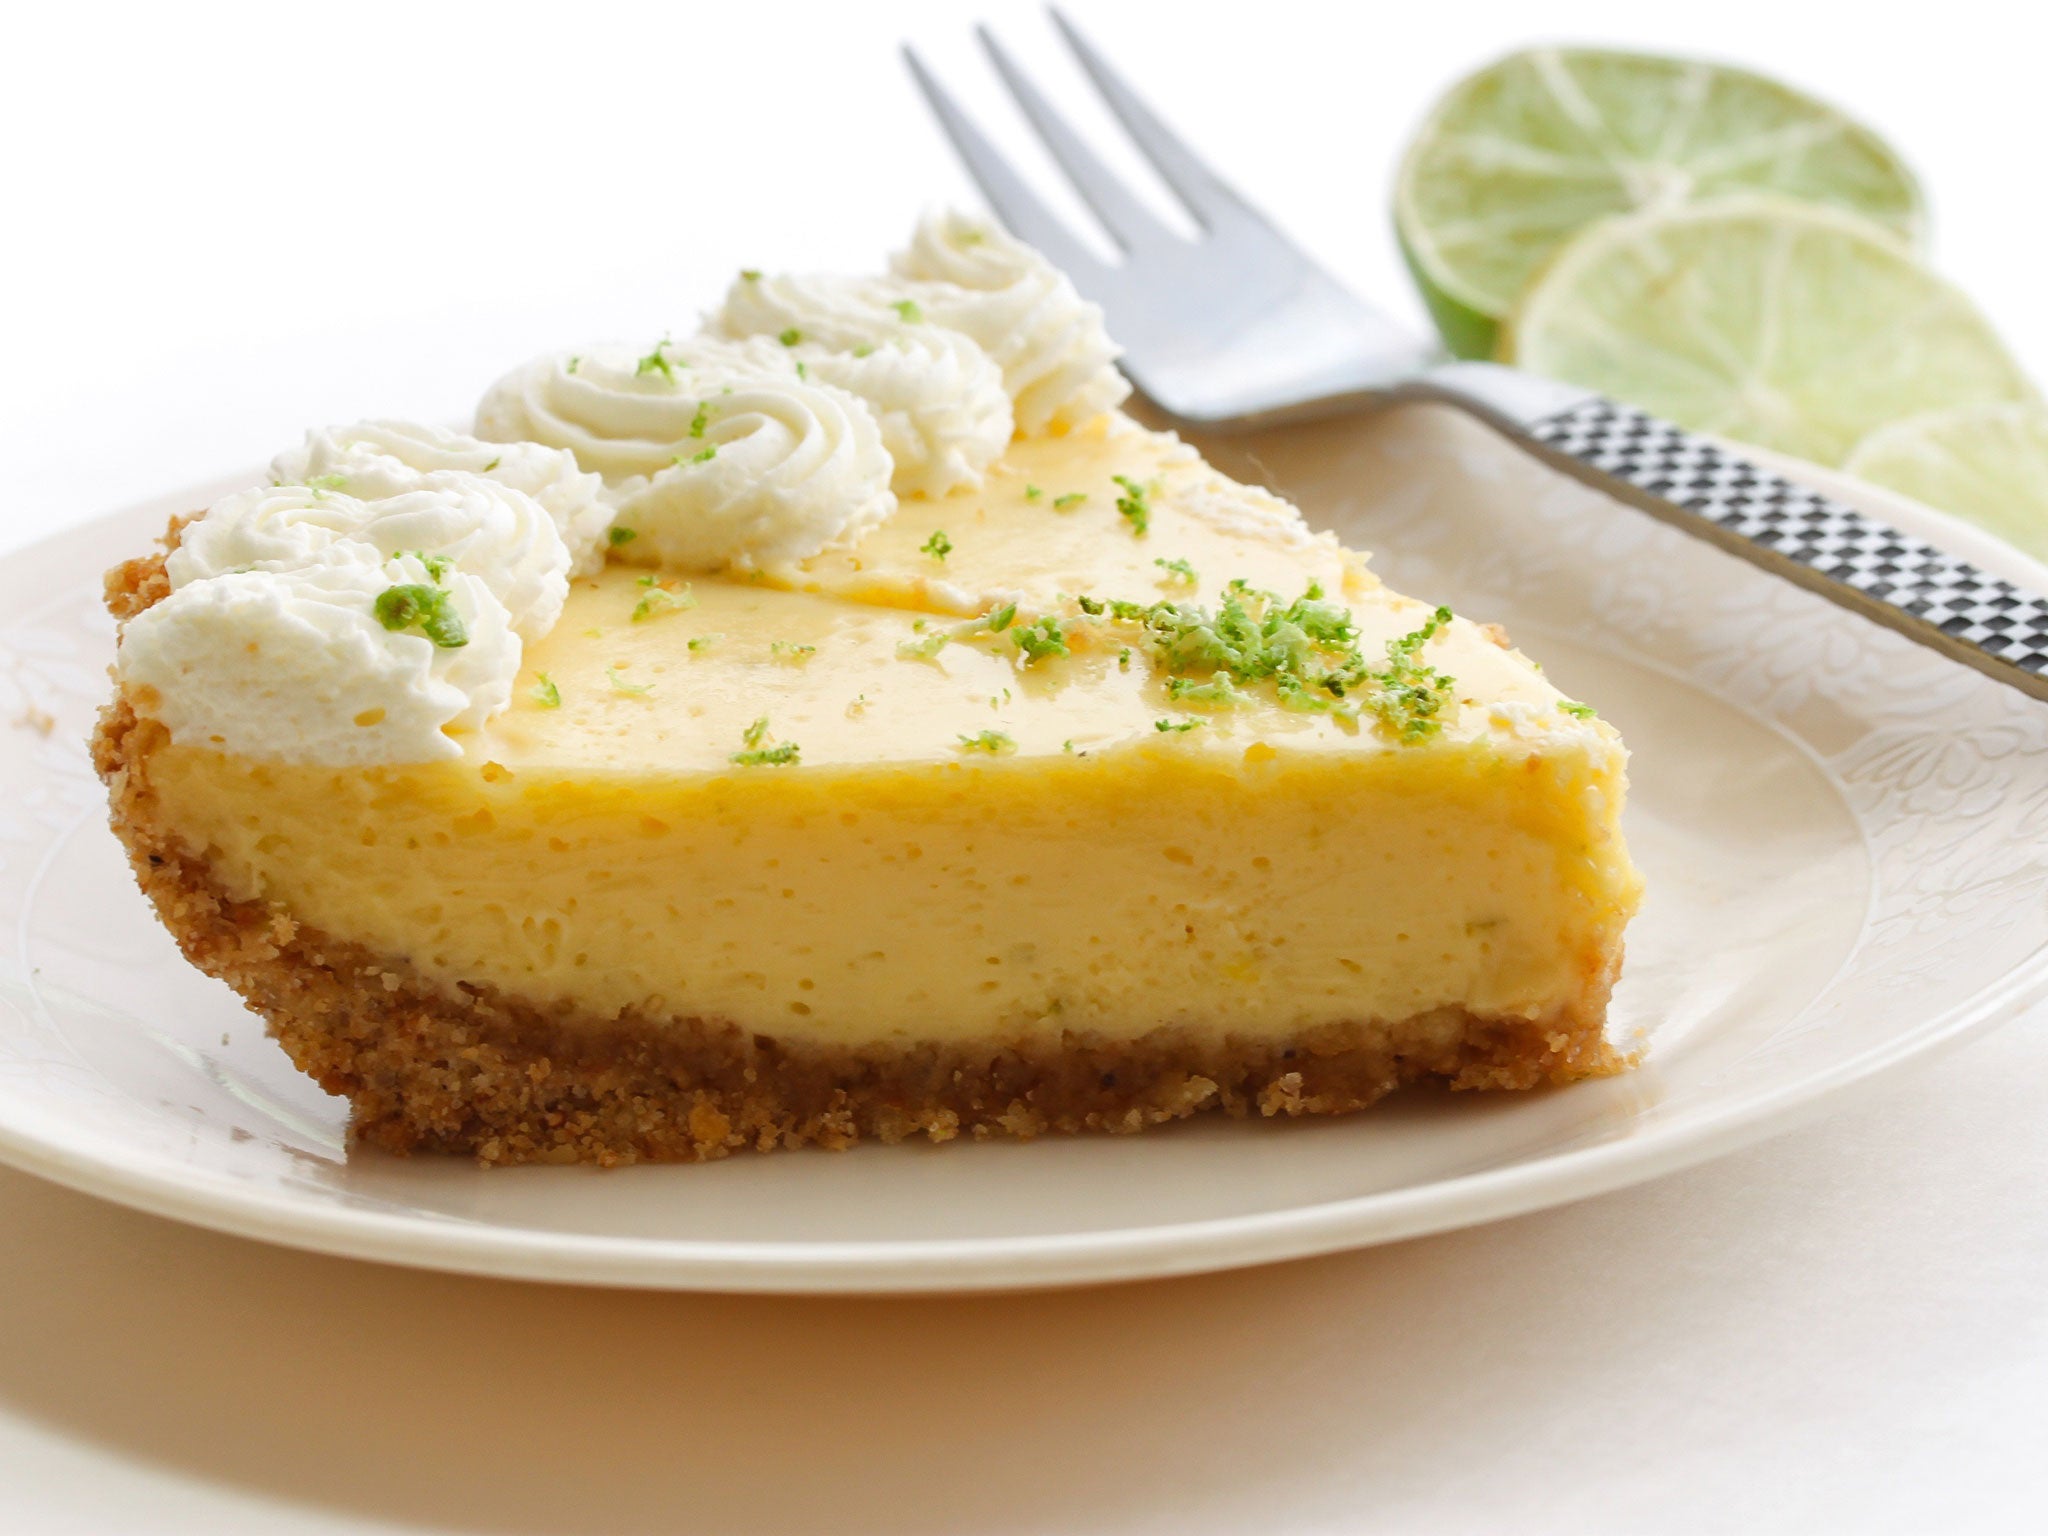 Try a Key lime pie made sweet with honey